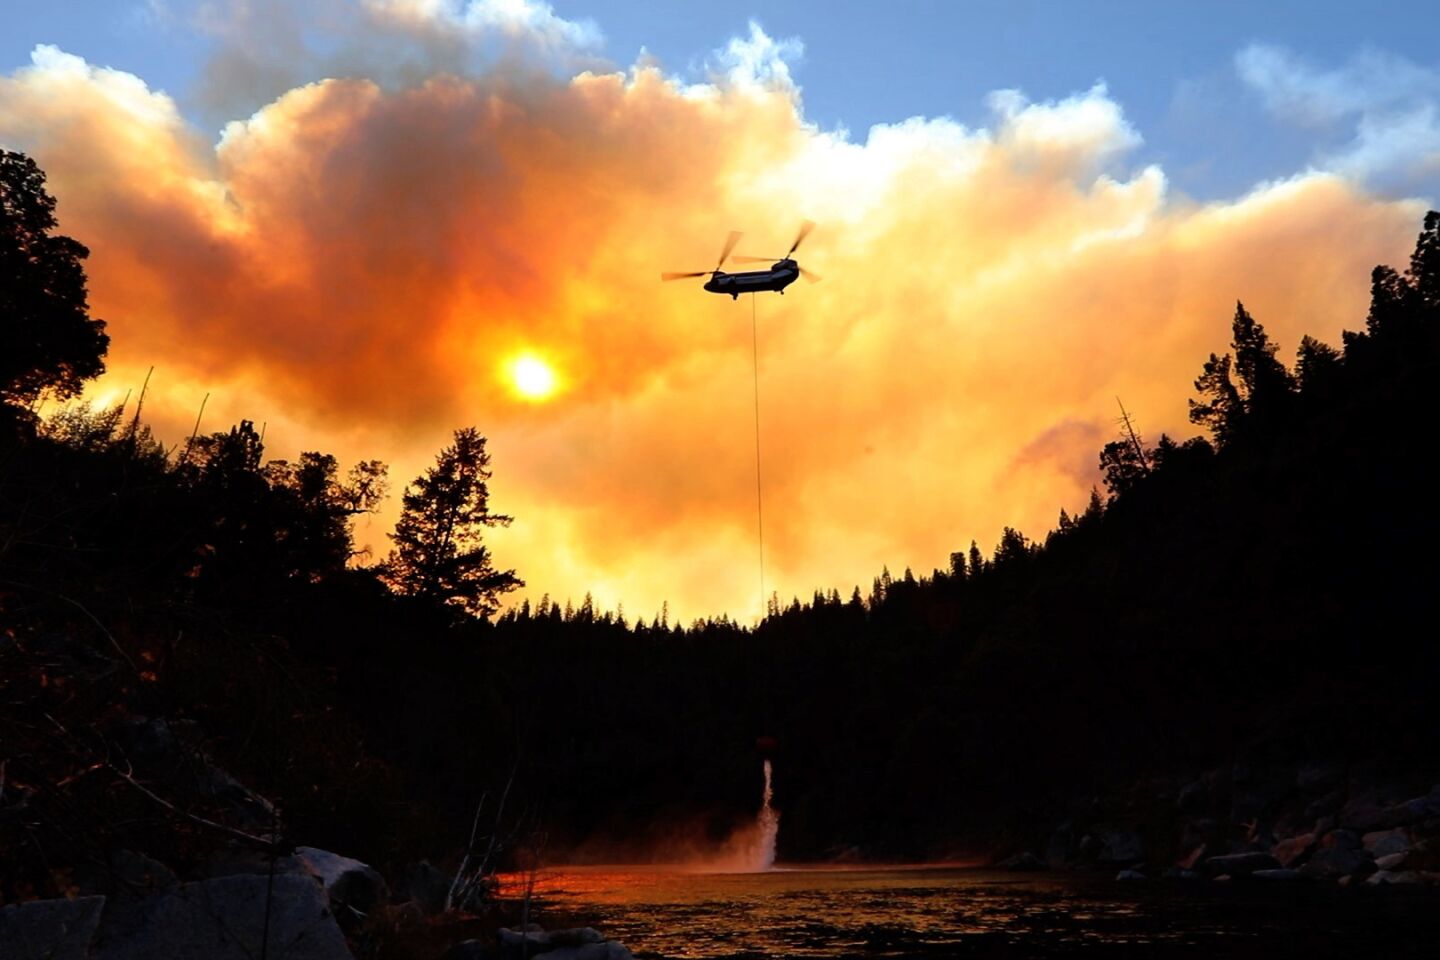 Outside of Pulga, Calif., on the North Fork of the Feather River, where the Camp fire may have started, helicopters do airdrops while ground crews try to keep the fire from spreading.